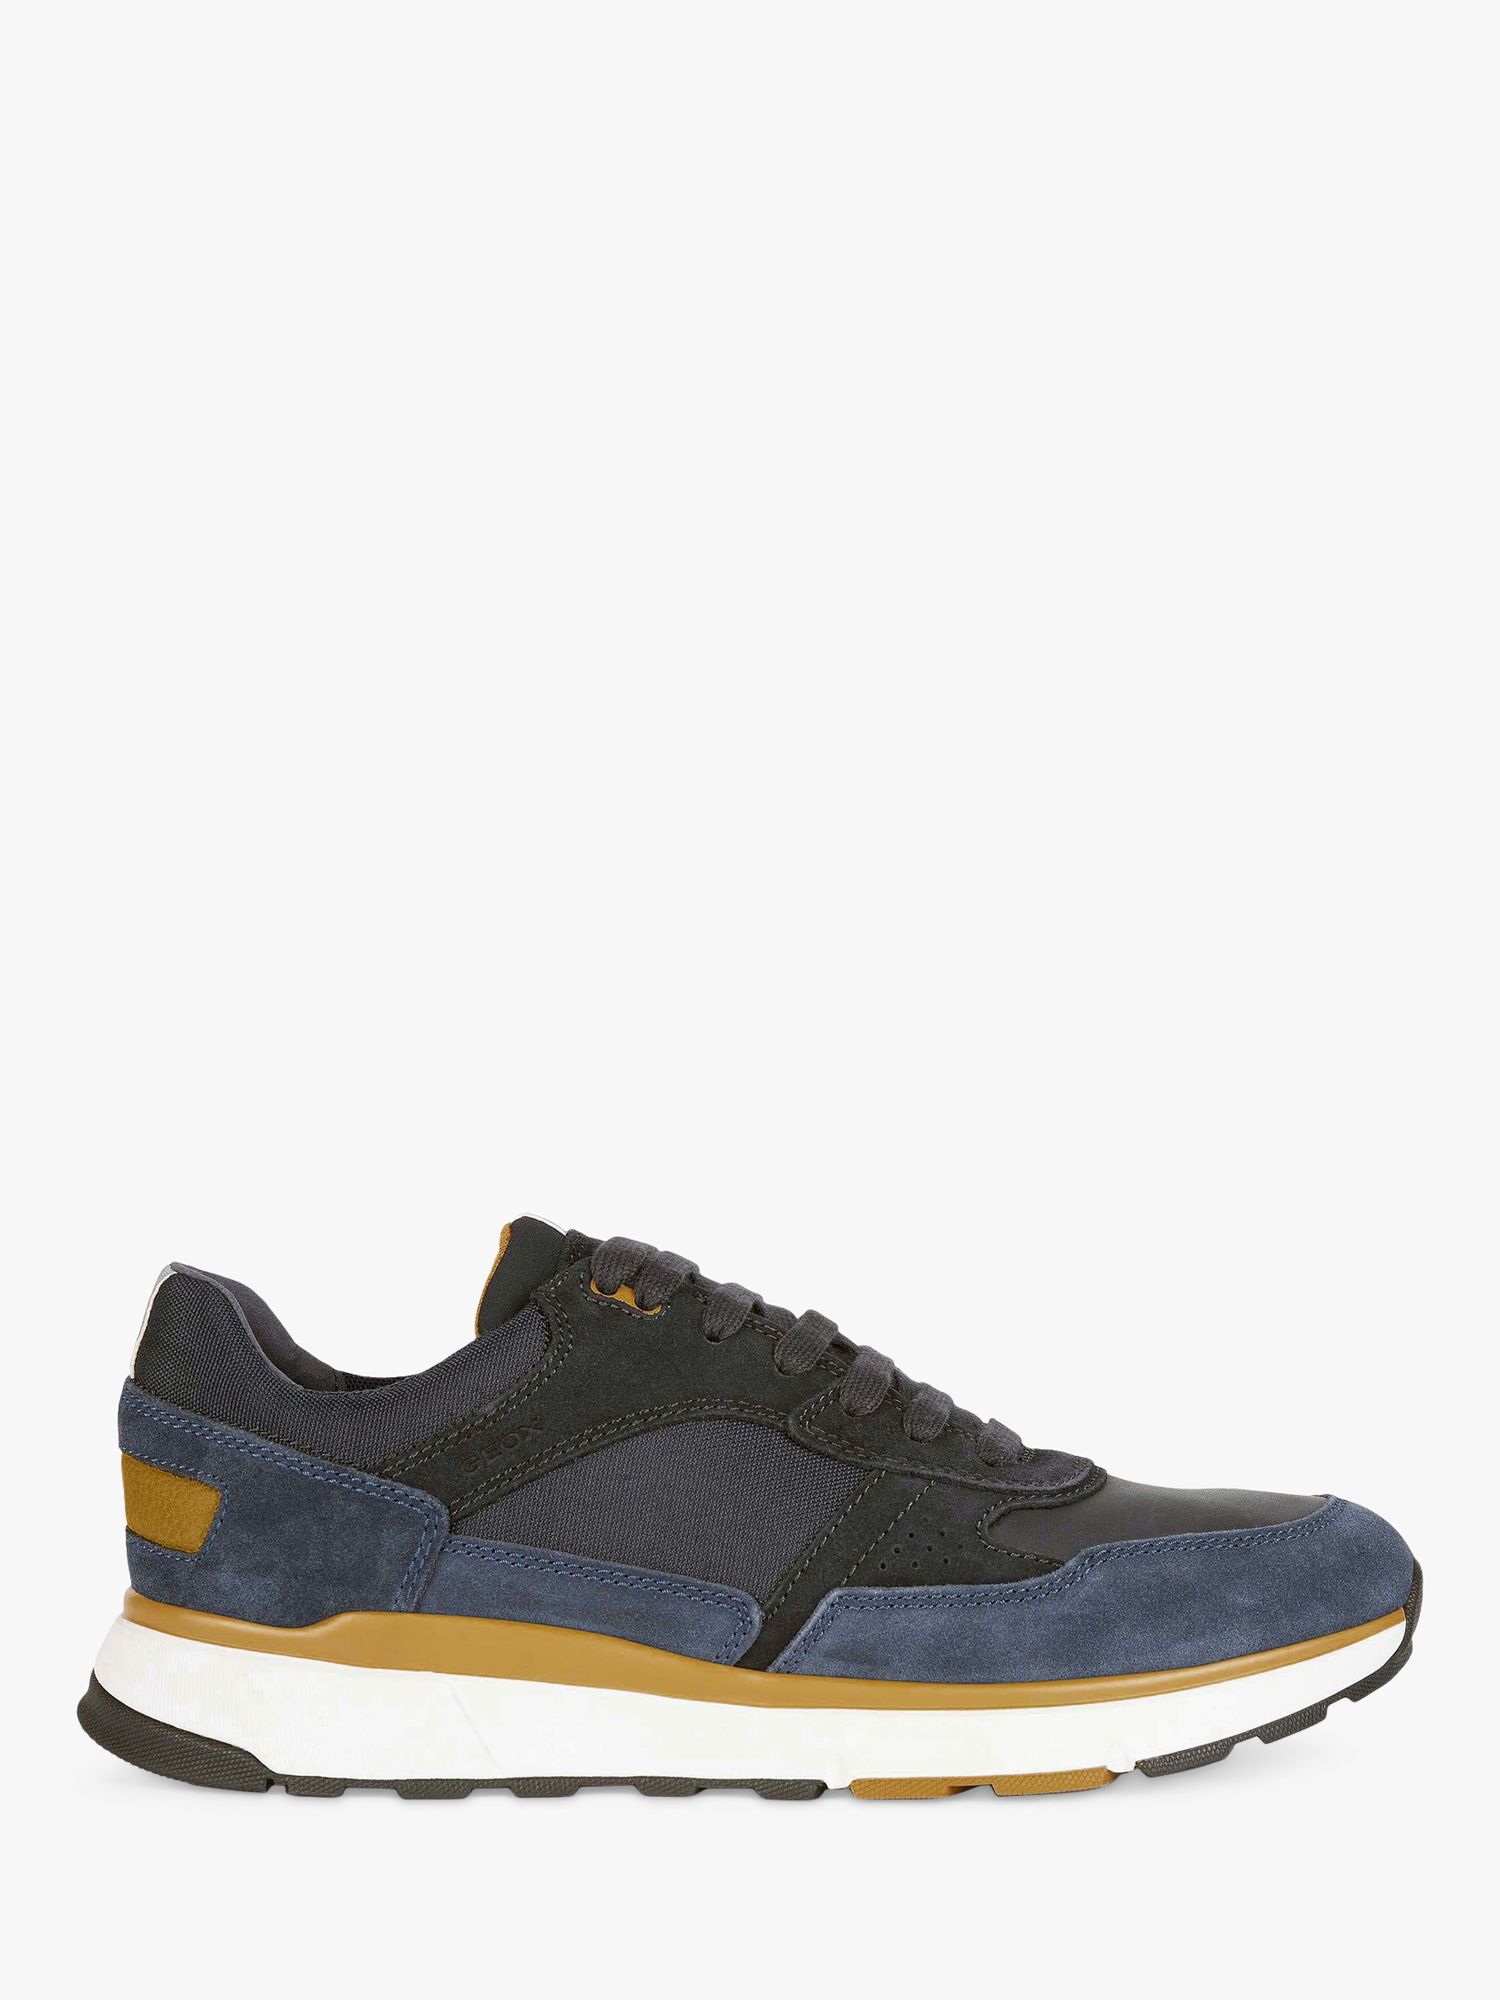 Geox Dolomia Suede Lace Up Trainers,